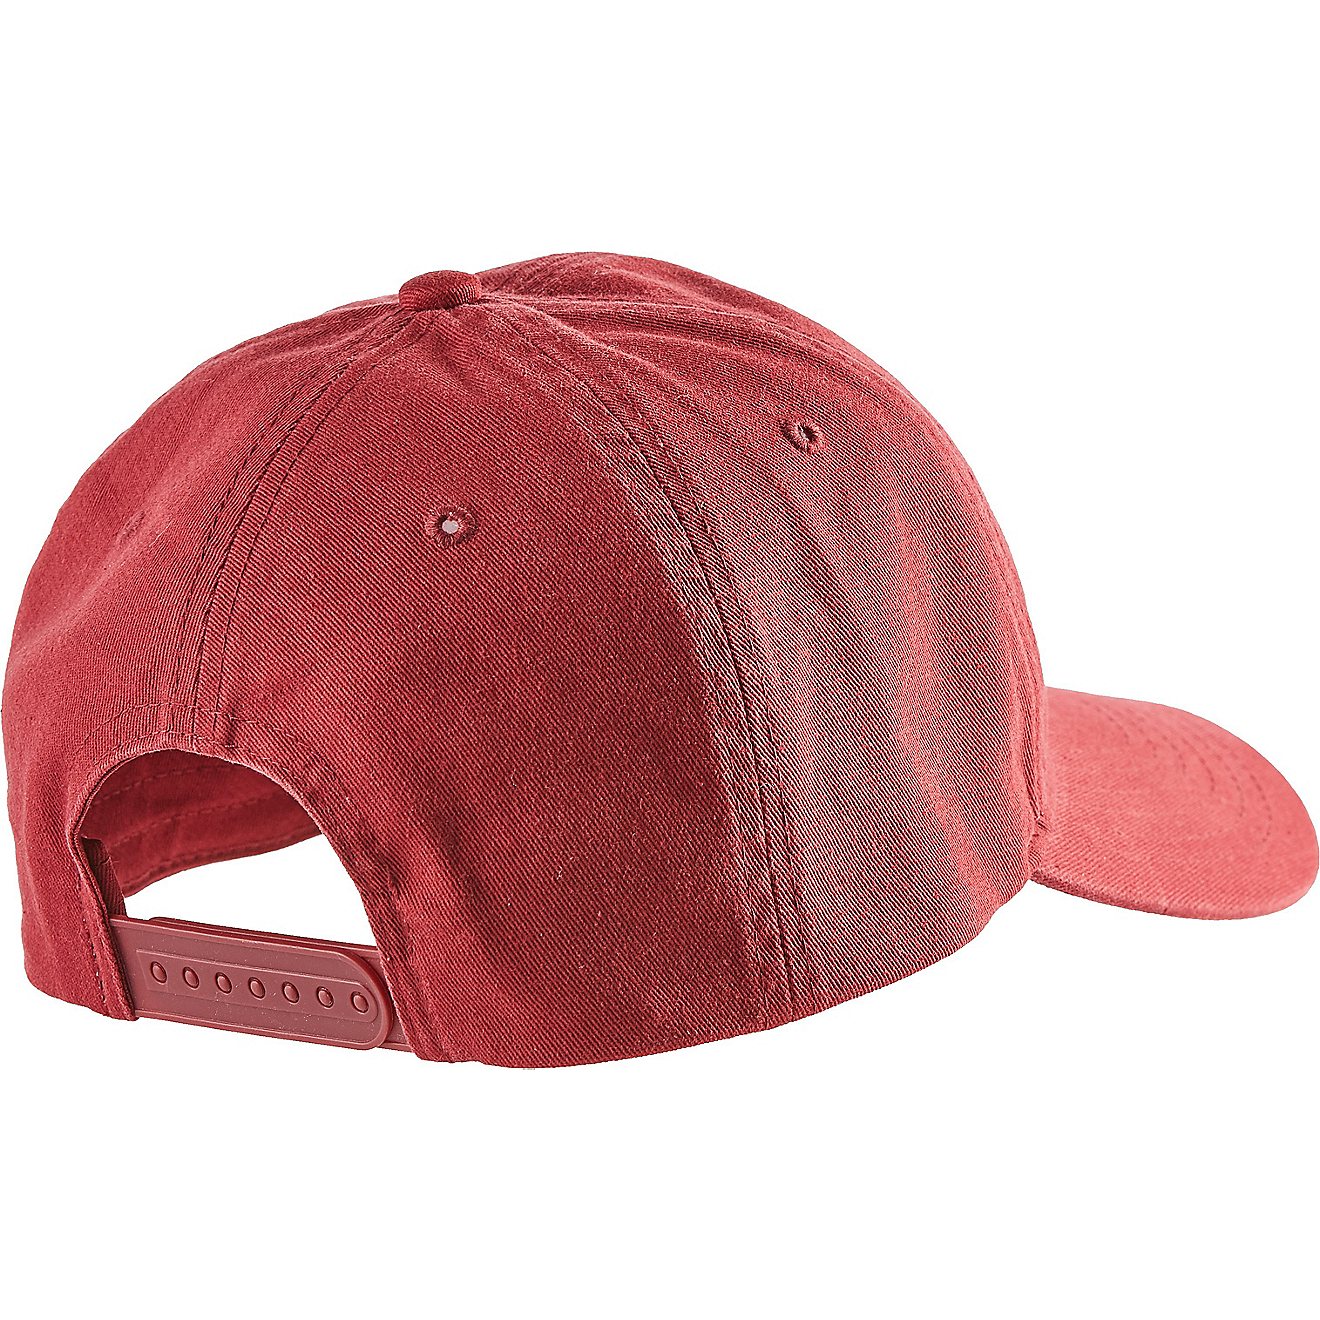 Academy Sports + Outdoors Men's Georgia State Outline Cap                                                                        - view number 2